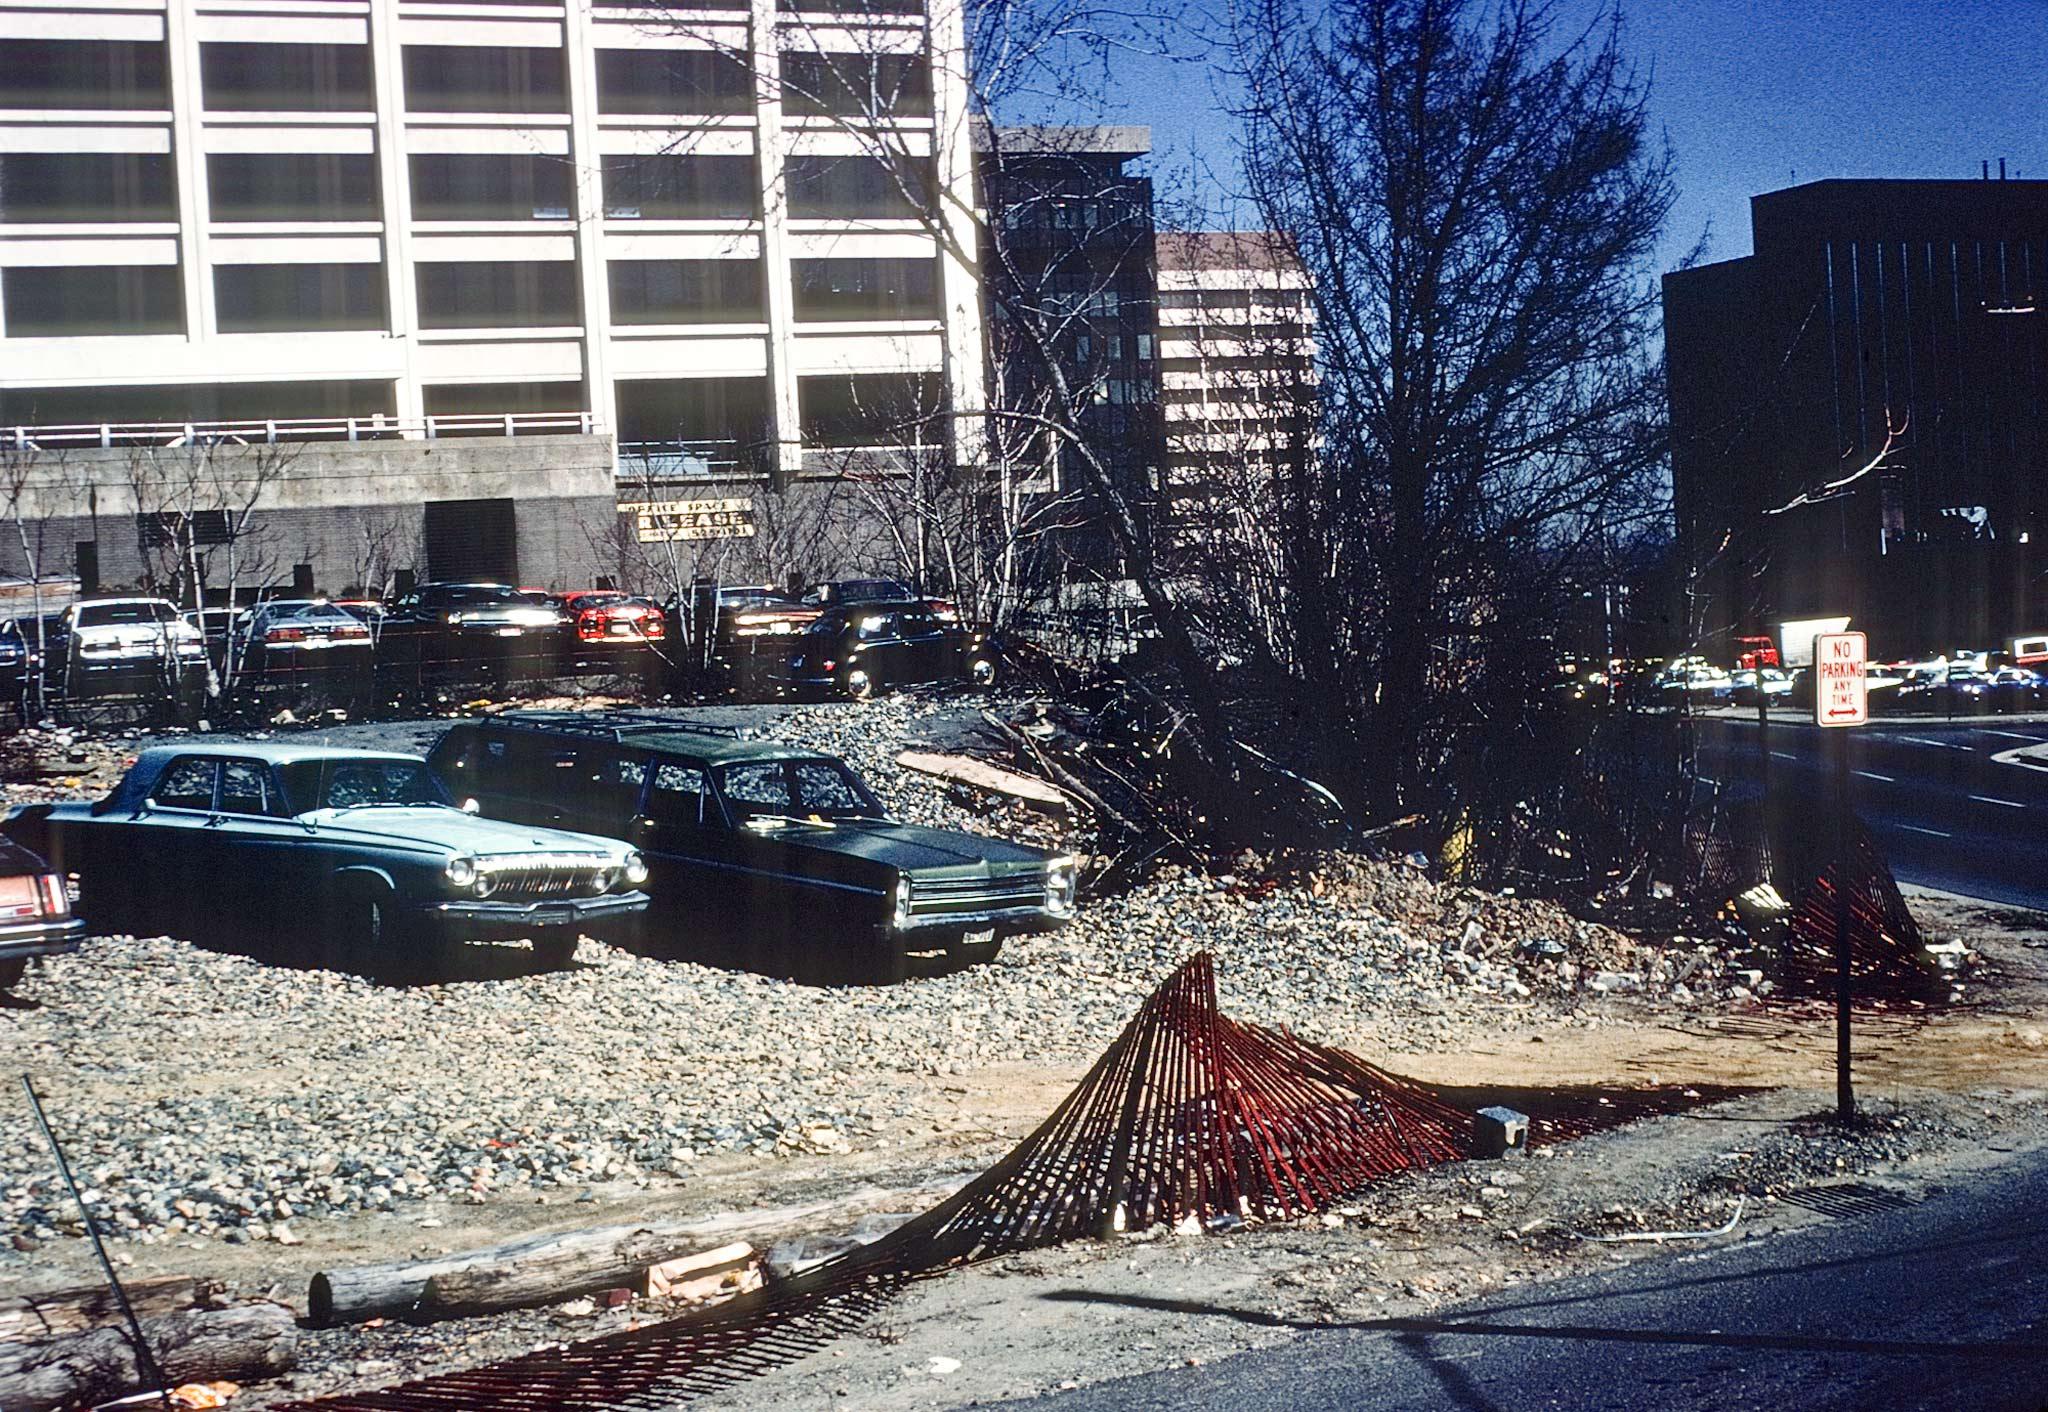 several cars in a gravel parking lot with a building behind